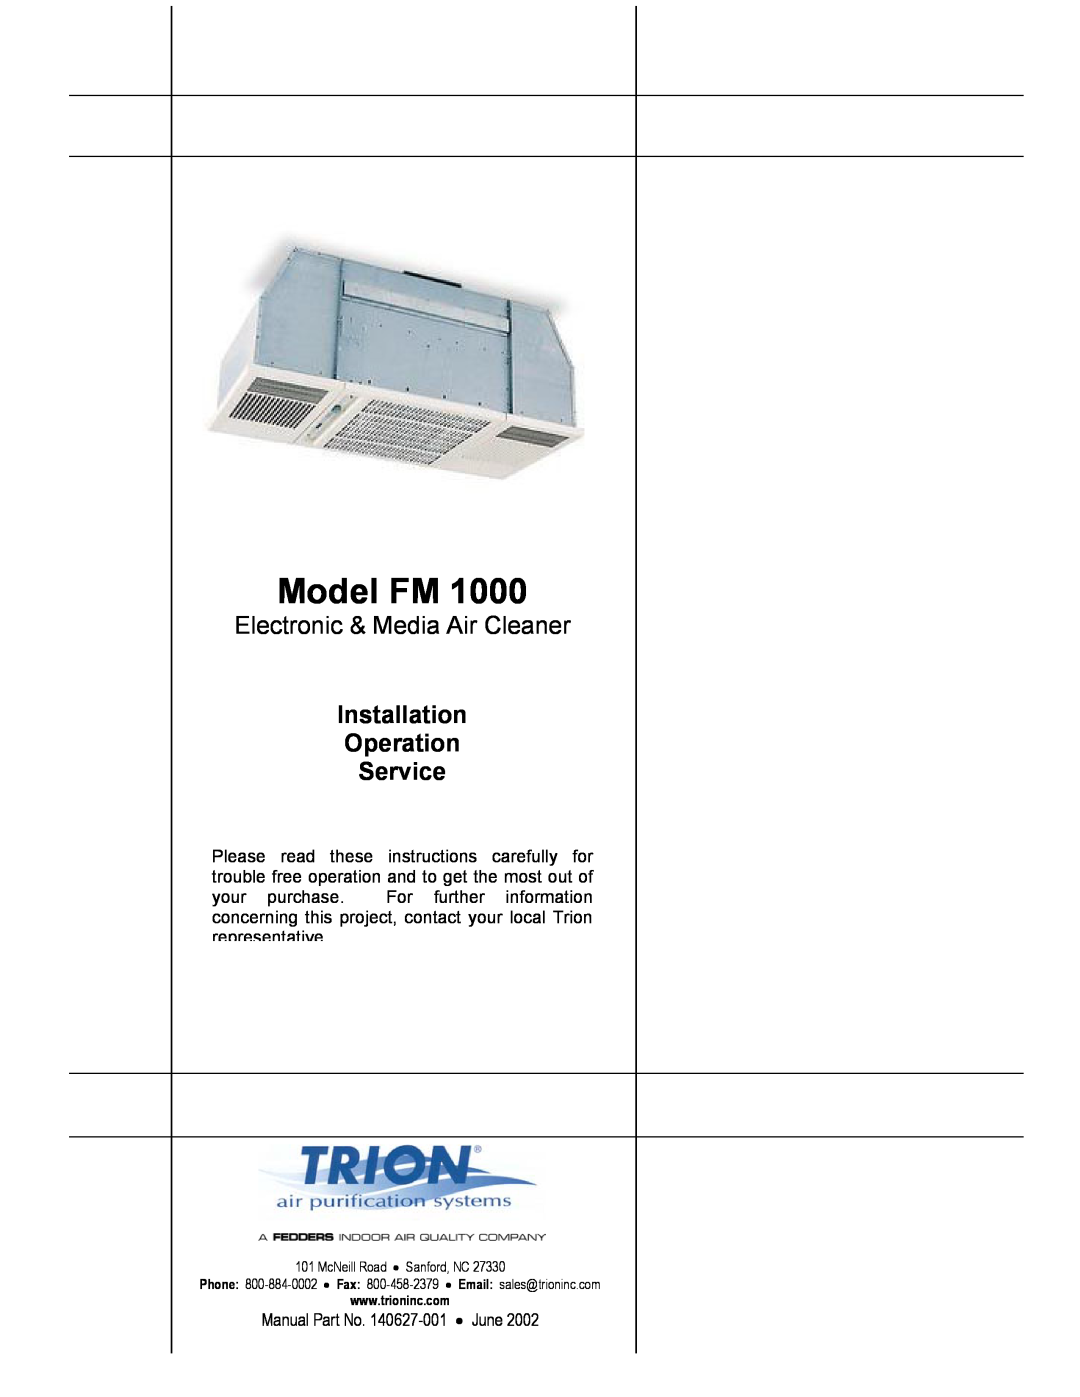 Trion FM 1000 manual Model FM, Electronic & Media Air Cleaner, Installation Operation Service 